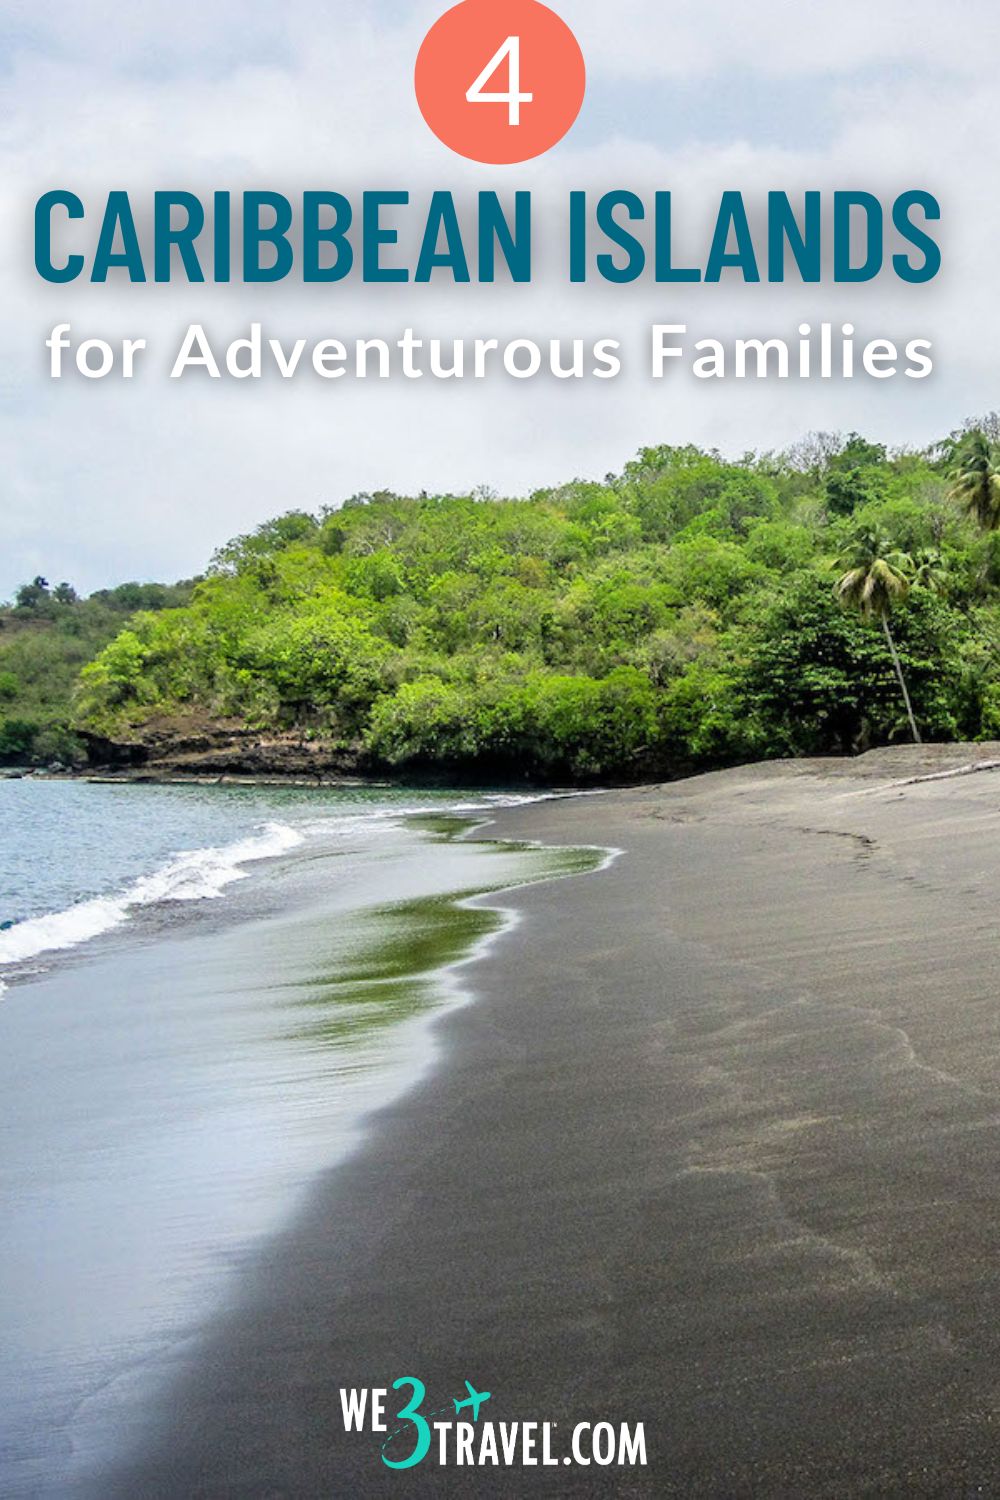 Looking for a fun family vacation? Discover the best Caribbean islands for teens and adventure. From water sports to hiking, explore our top picks!